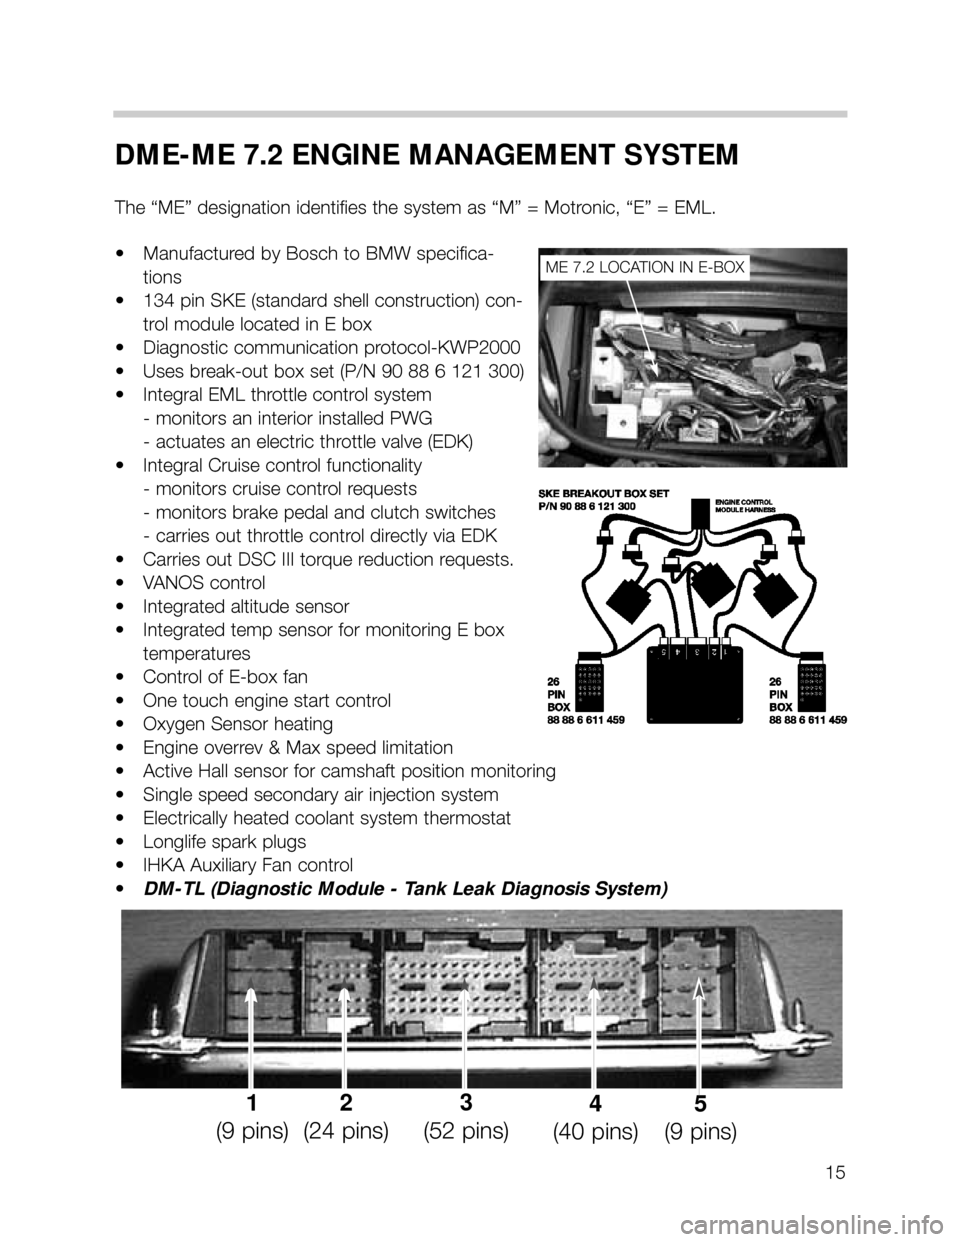 BMW 540i 1999 E39 M62TU Engine Workshop Manual 15
DME-ME 7.2 ENGINE MANAGEMENT SYSTEM
The “ME” designation identifies the system as “M” = Motronic, “E” = EML.
• Manufactured by Bosch to BMW specifica-
tions
• 134 pin SKE (standard 